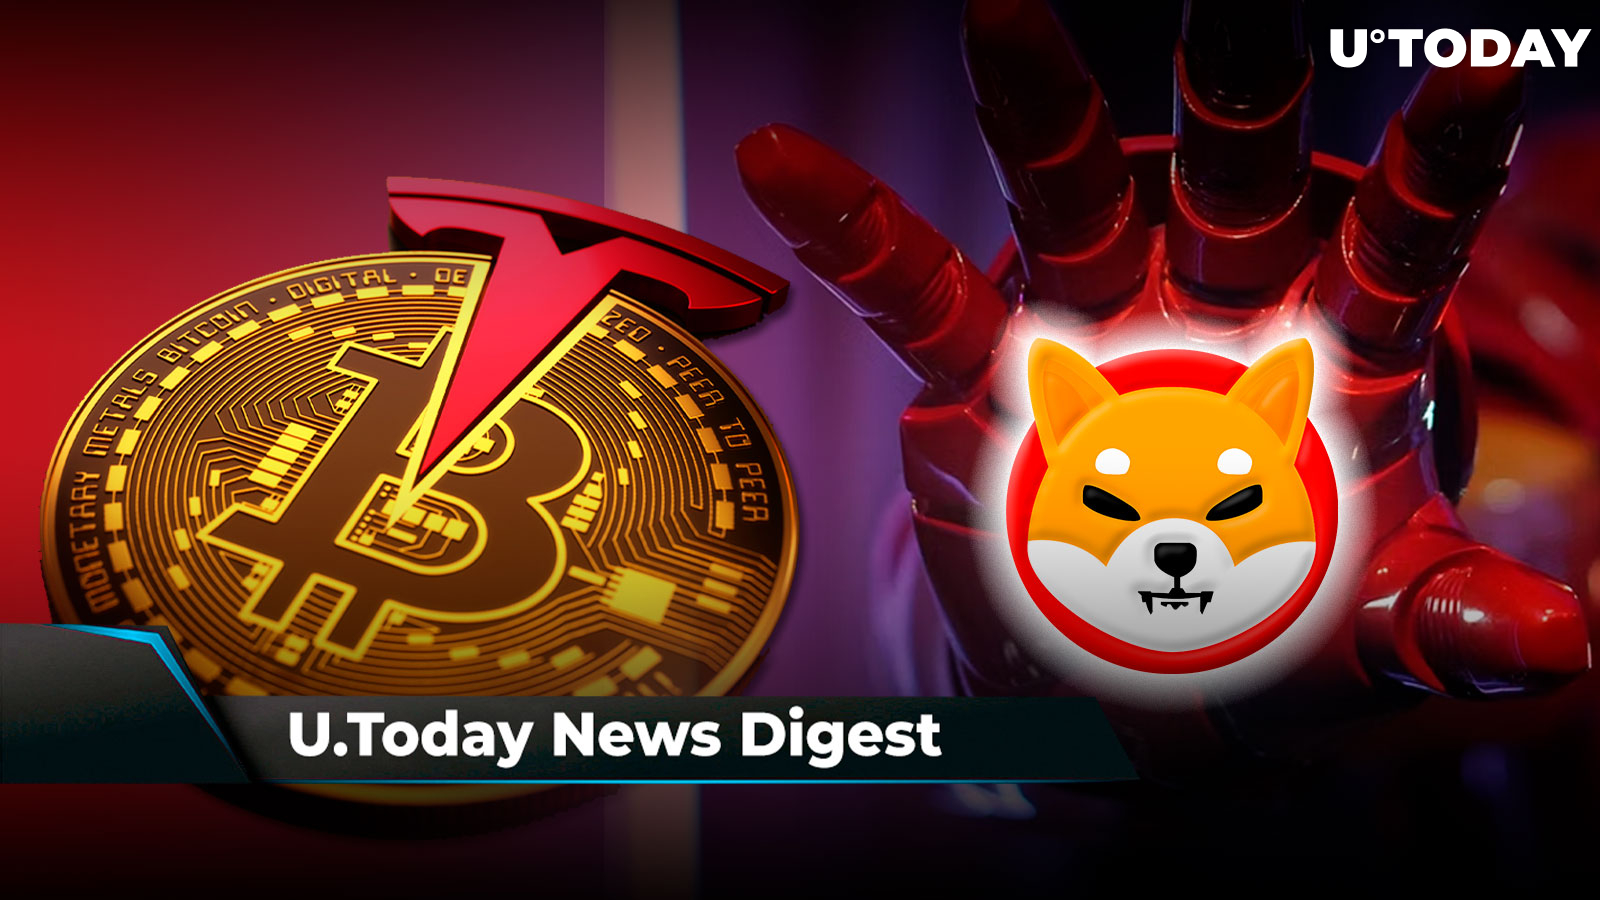 SHIB Partners with Marvel Collaborator, Elon Musk Comments on Tesla’s BTC Sales, XRP Suspicious Activity on Exchanges Continues: Crypto News Digest by U.Today